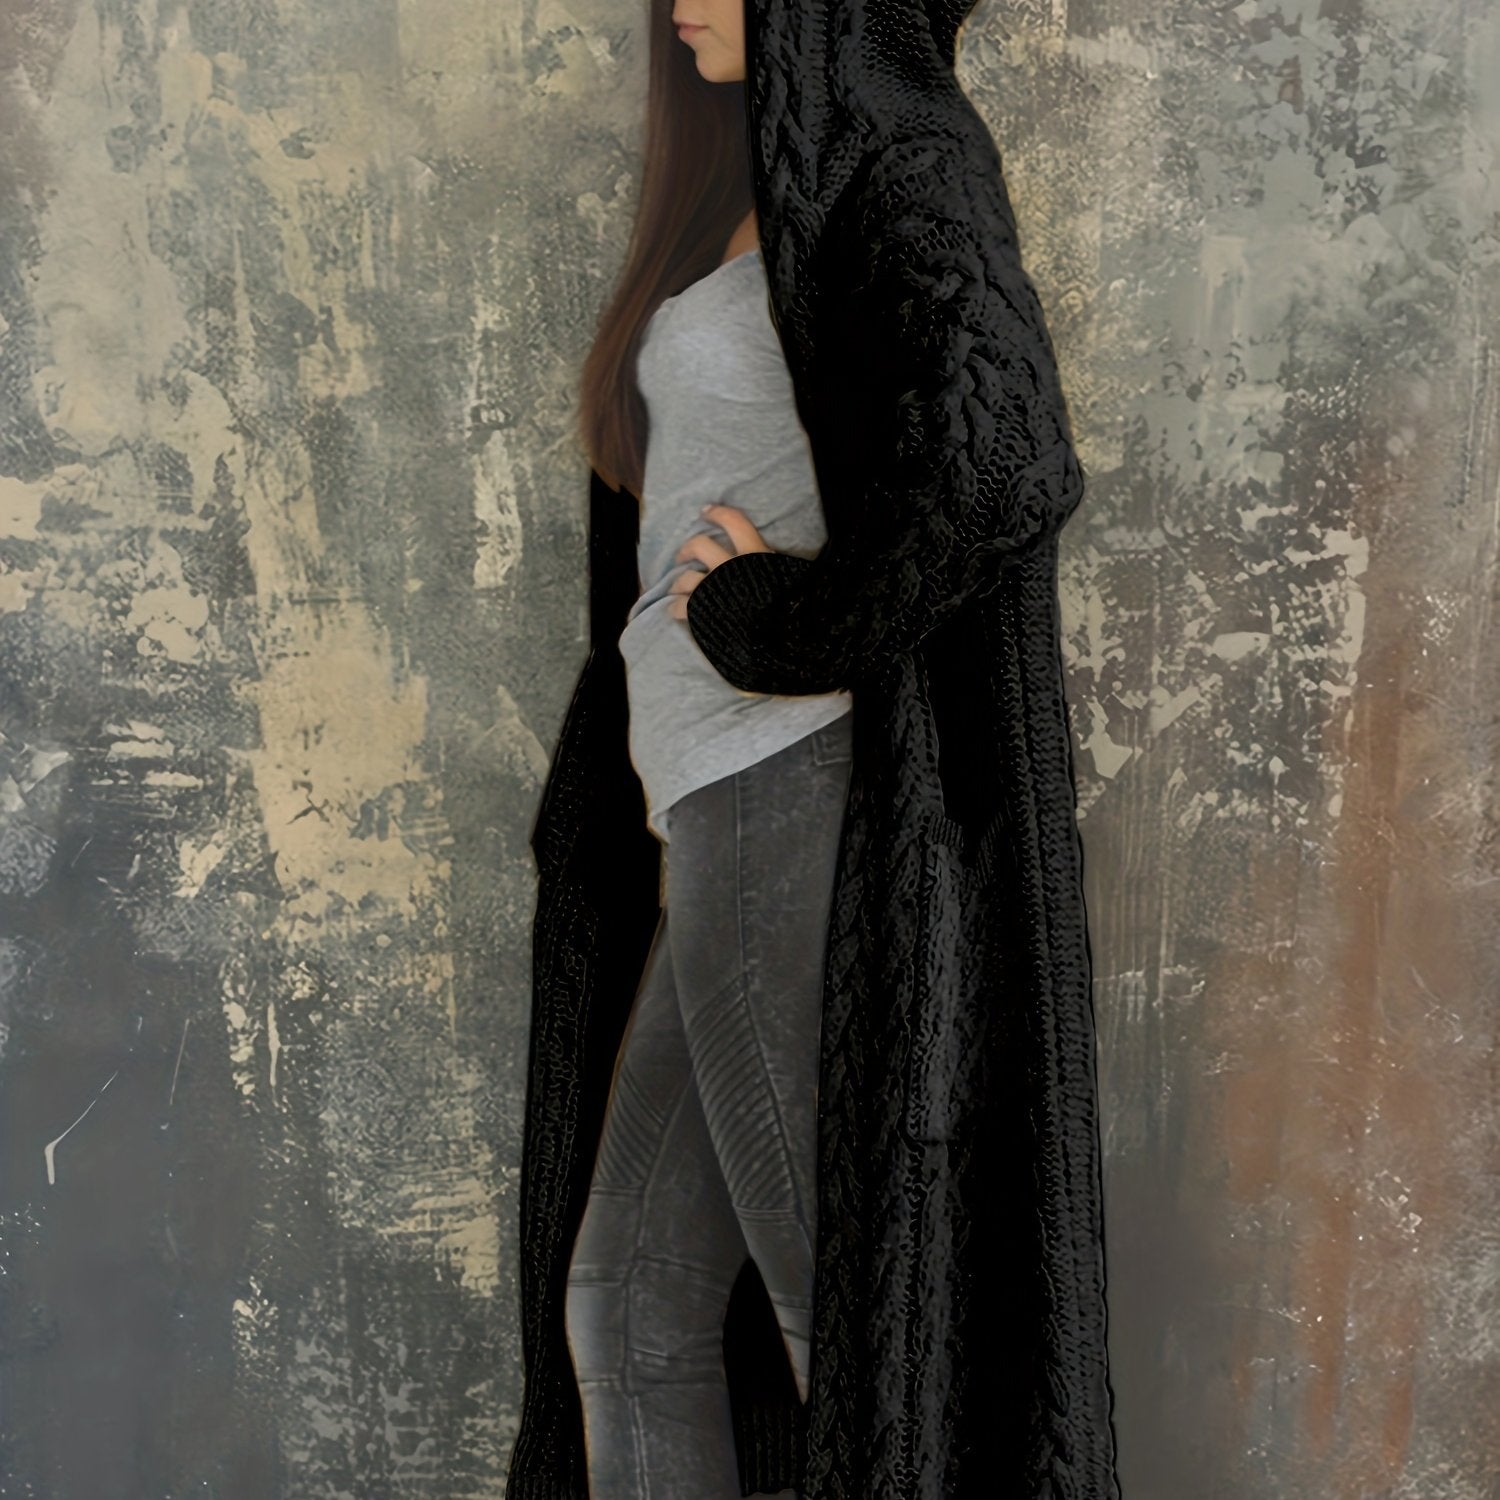 Plus Size Women's Solid Color Hooded Cardigan Coat, Casual Knitted Sweater Coat black